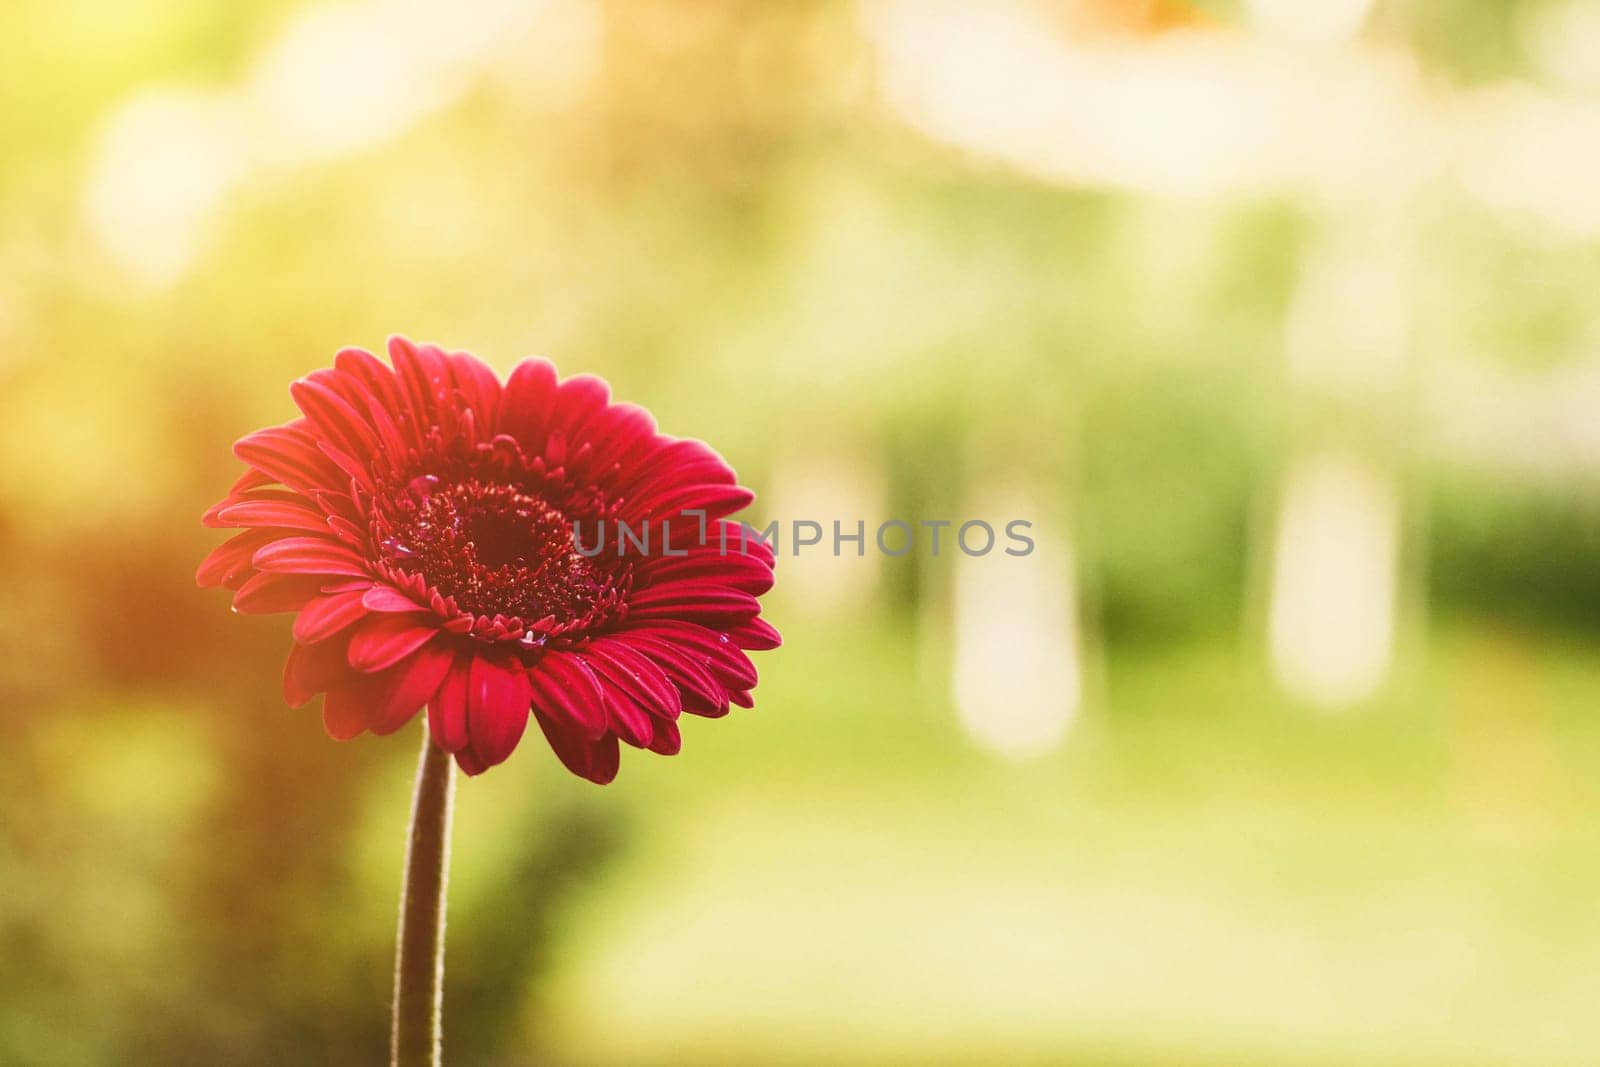 red flower and a sunny day - spring holidays and floral backgrounds styled concept